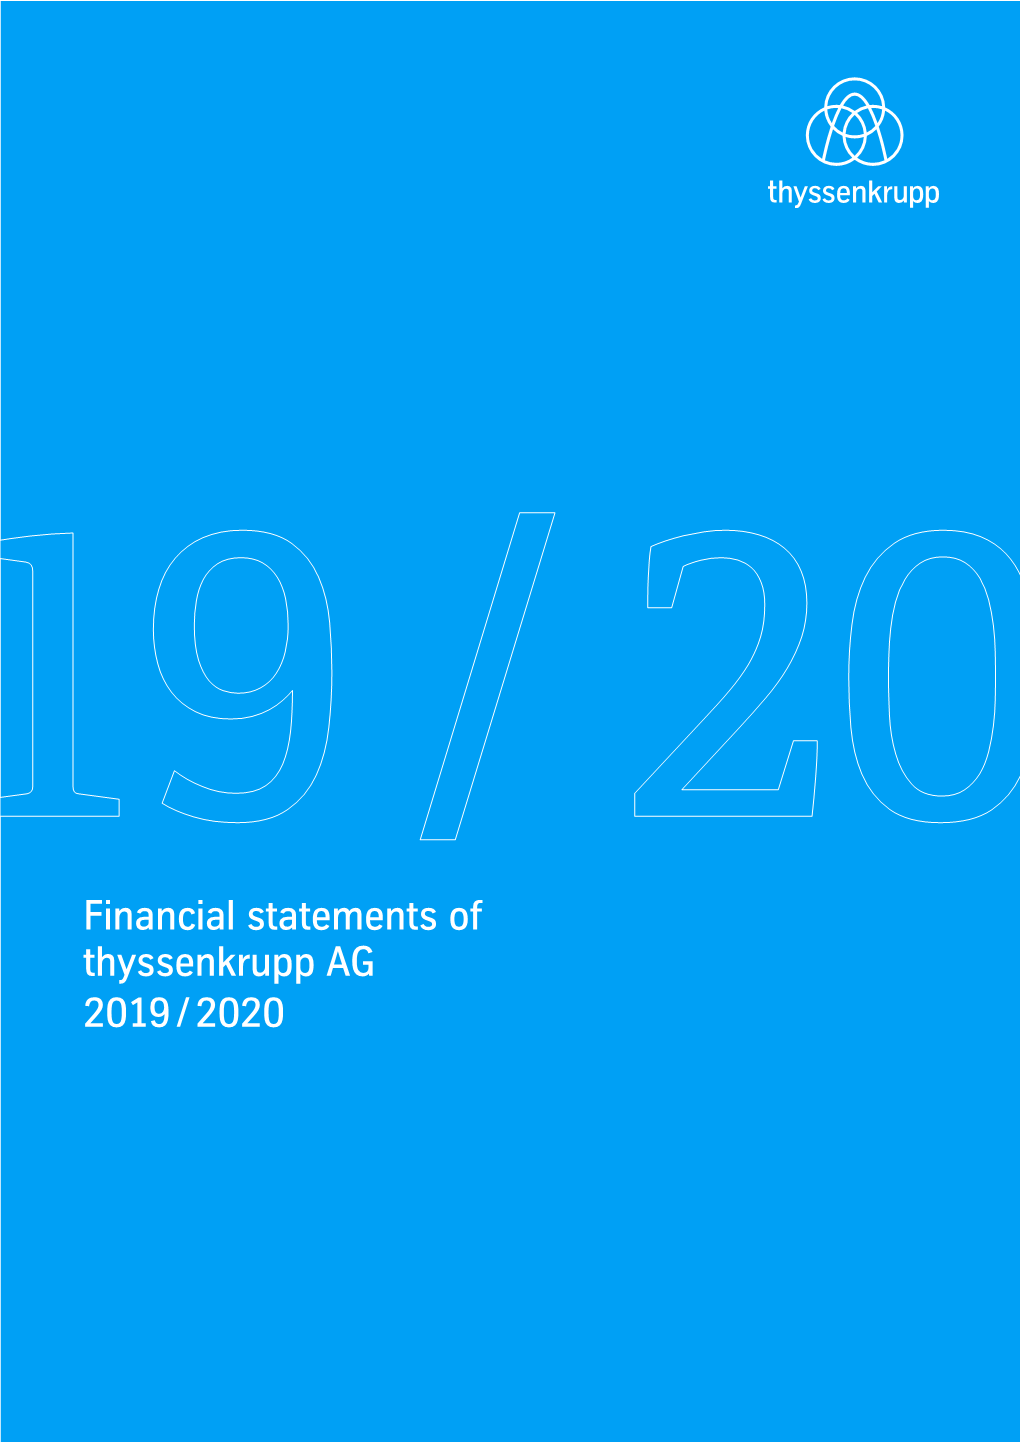 Financial Statements of Thyssenkrupp AG 2019/2020